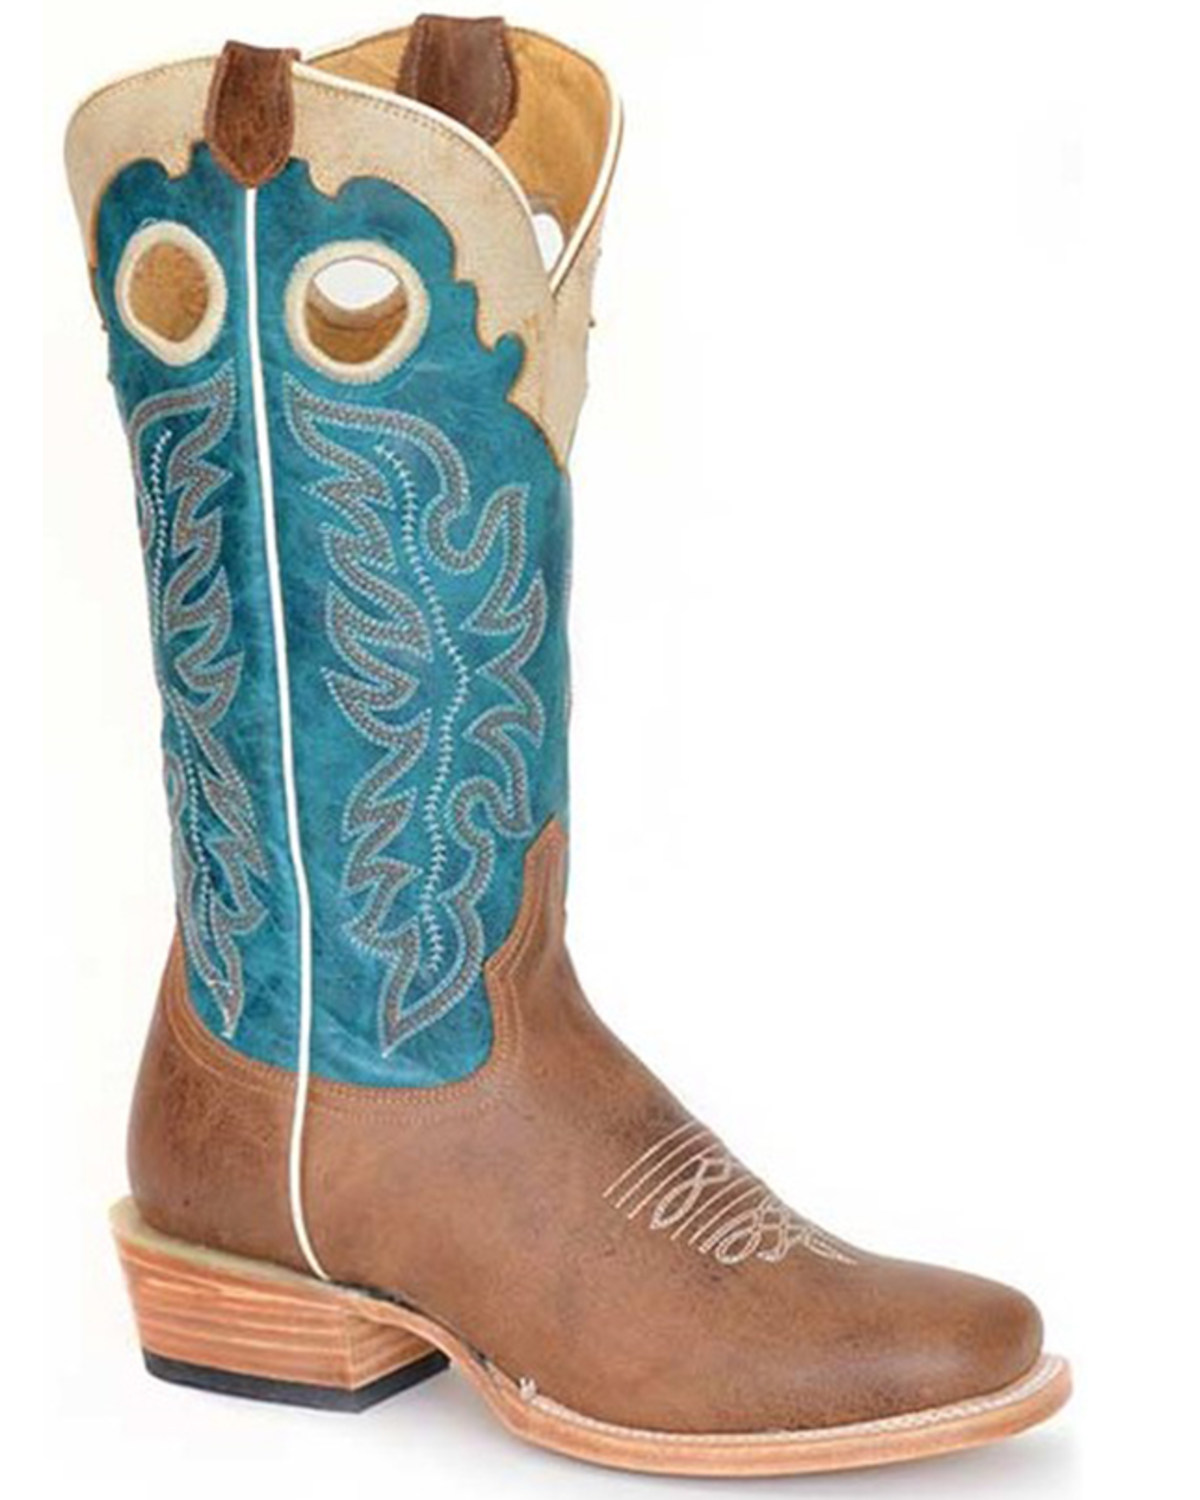 Roper Women's Ride Em' Cowgirl Western Boots - Square Toe